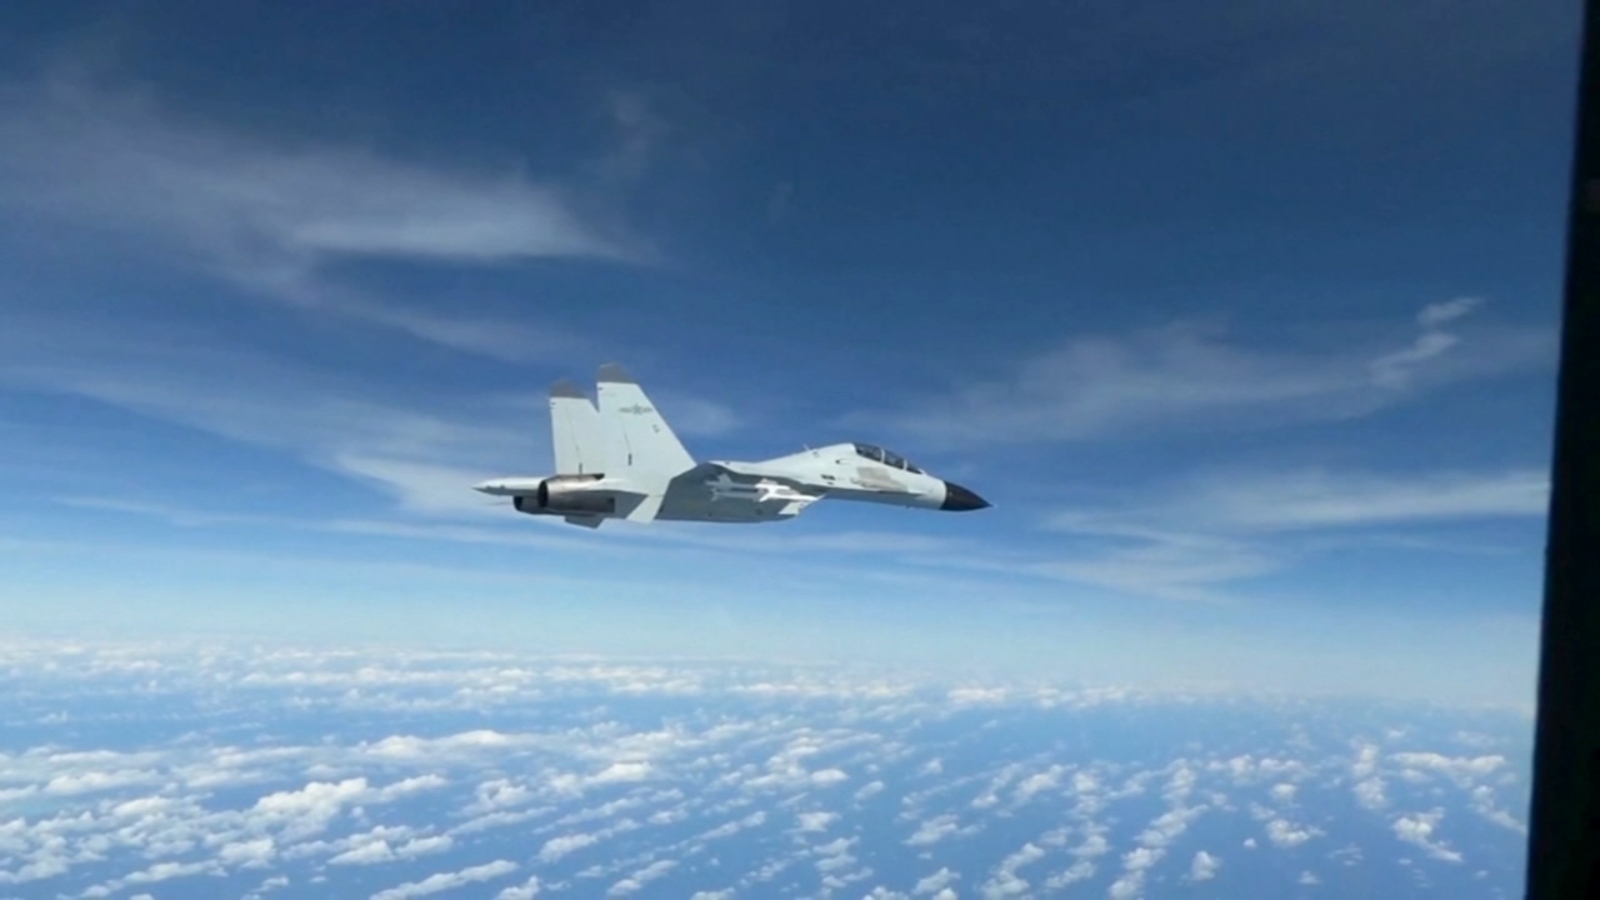 Chinese fighter jet intercepts US recon aircraft with ‘unsafe maneuver,’ US Defense Department says